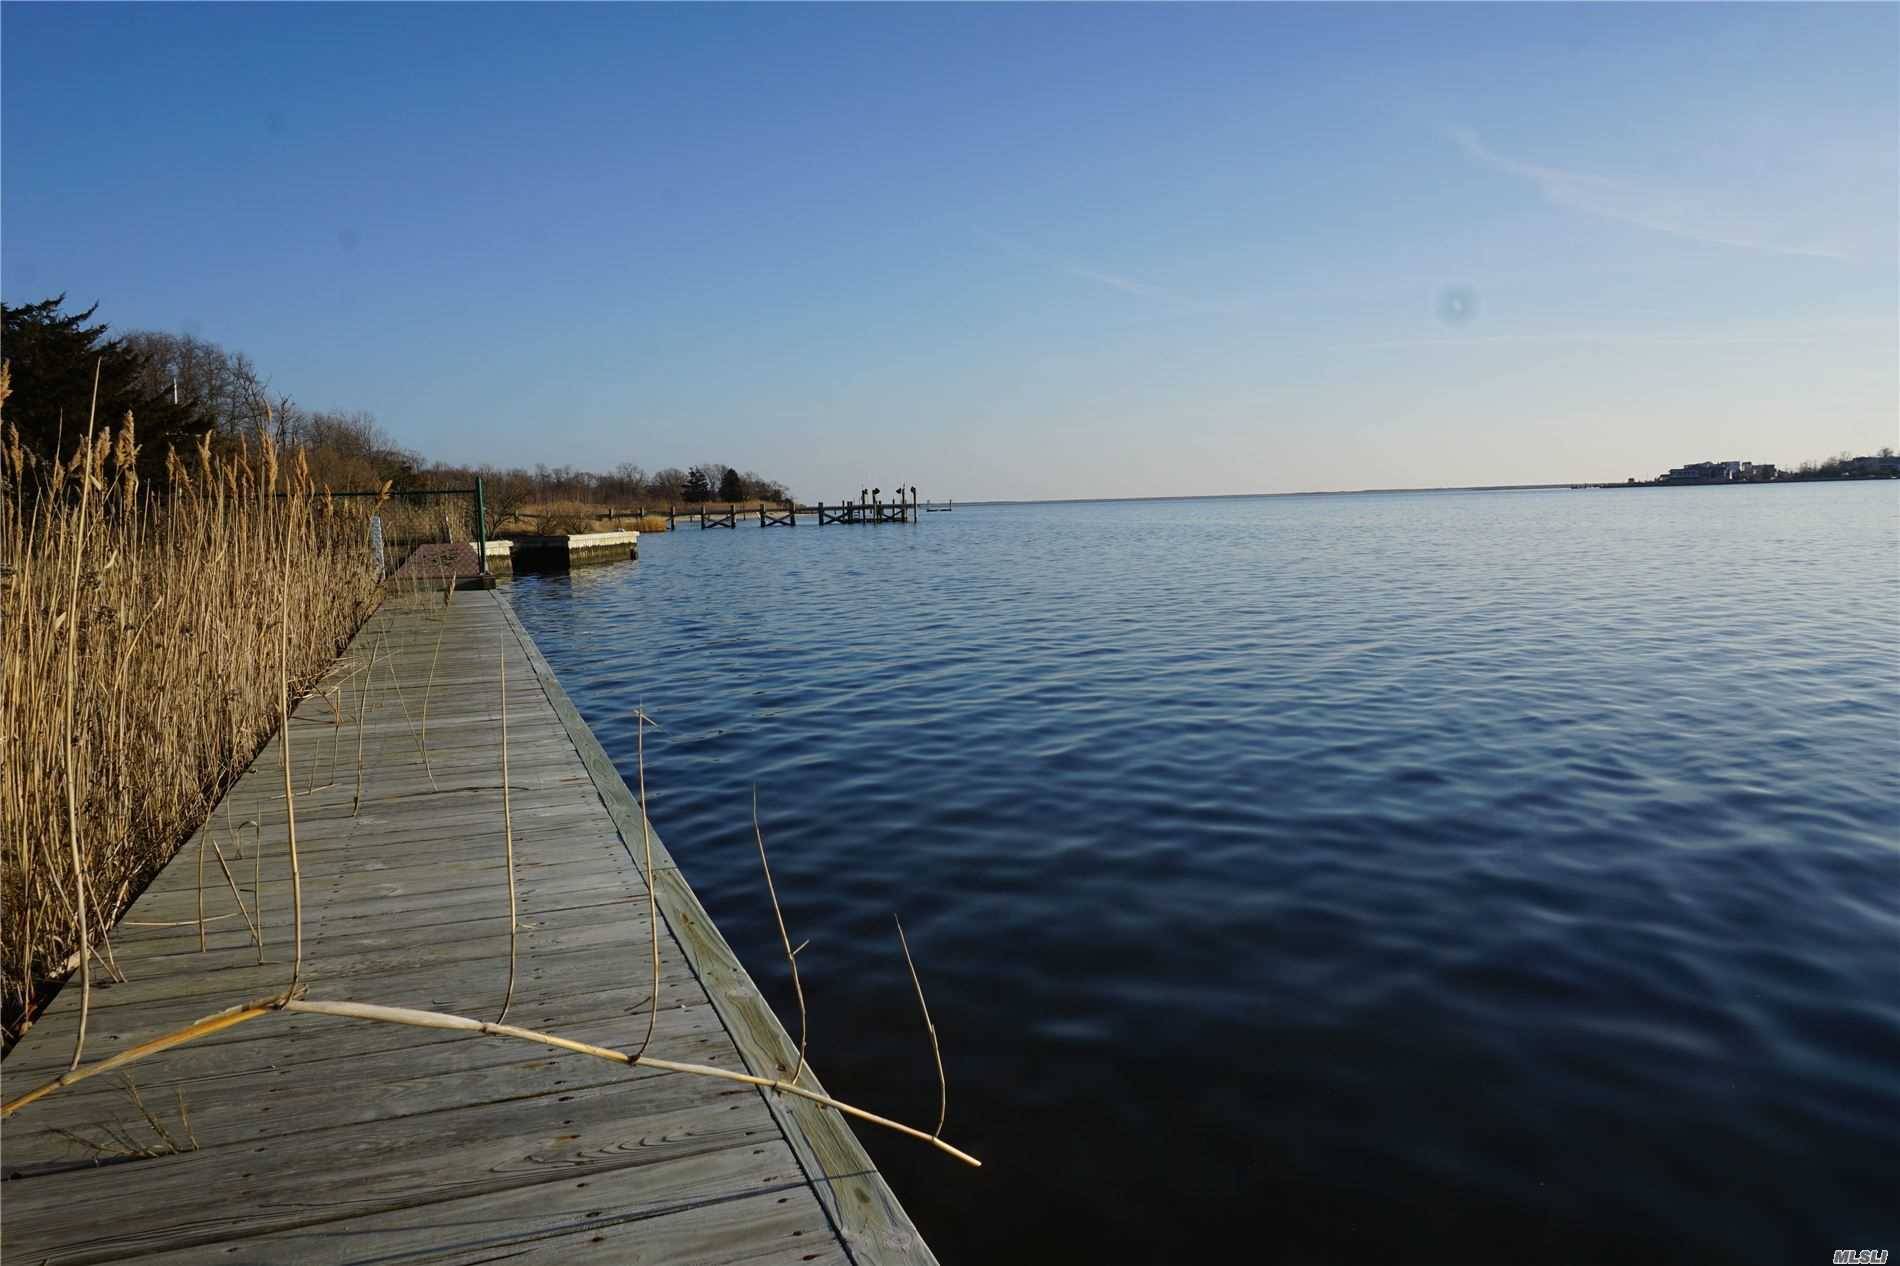 Nearly half an acre of waterfront property on the mouth of the Forge River leading into Moriches Bay along Long Island's south shore.